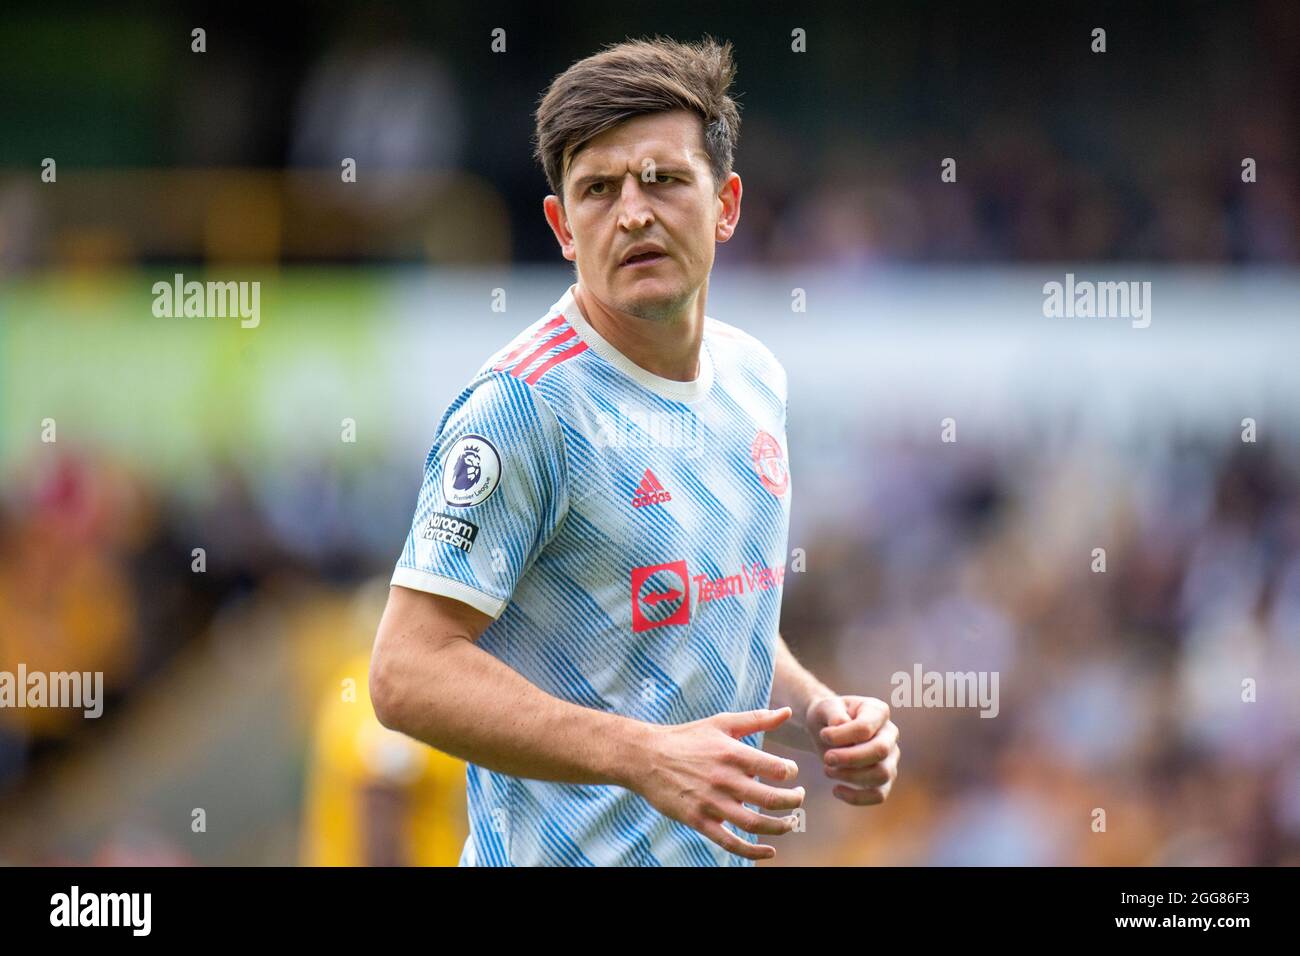 WOLVERHAMPTON, ENGLAND - AUGUST 29: Harry Maguire of Manchester United during the Premier League match between Wolverhampton Wanderers  and  Mancheste Stock Photo